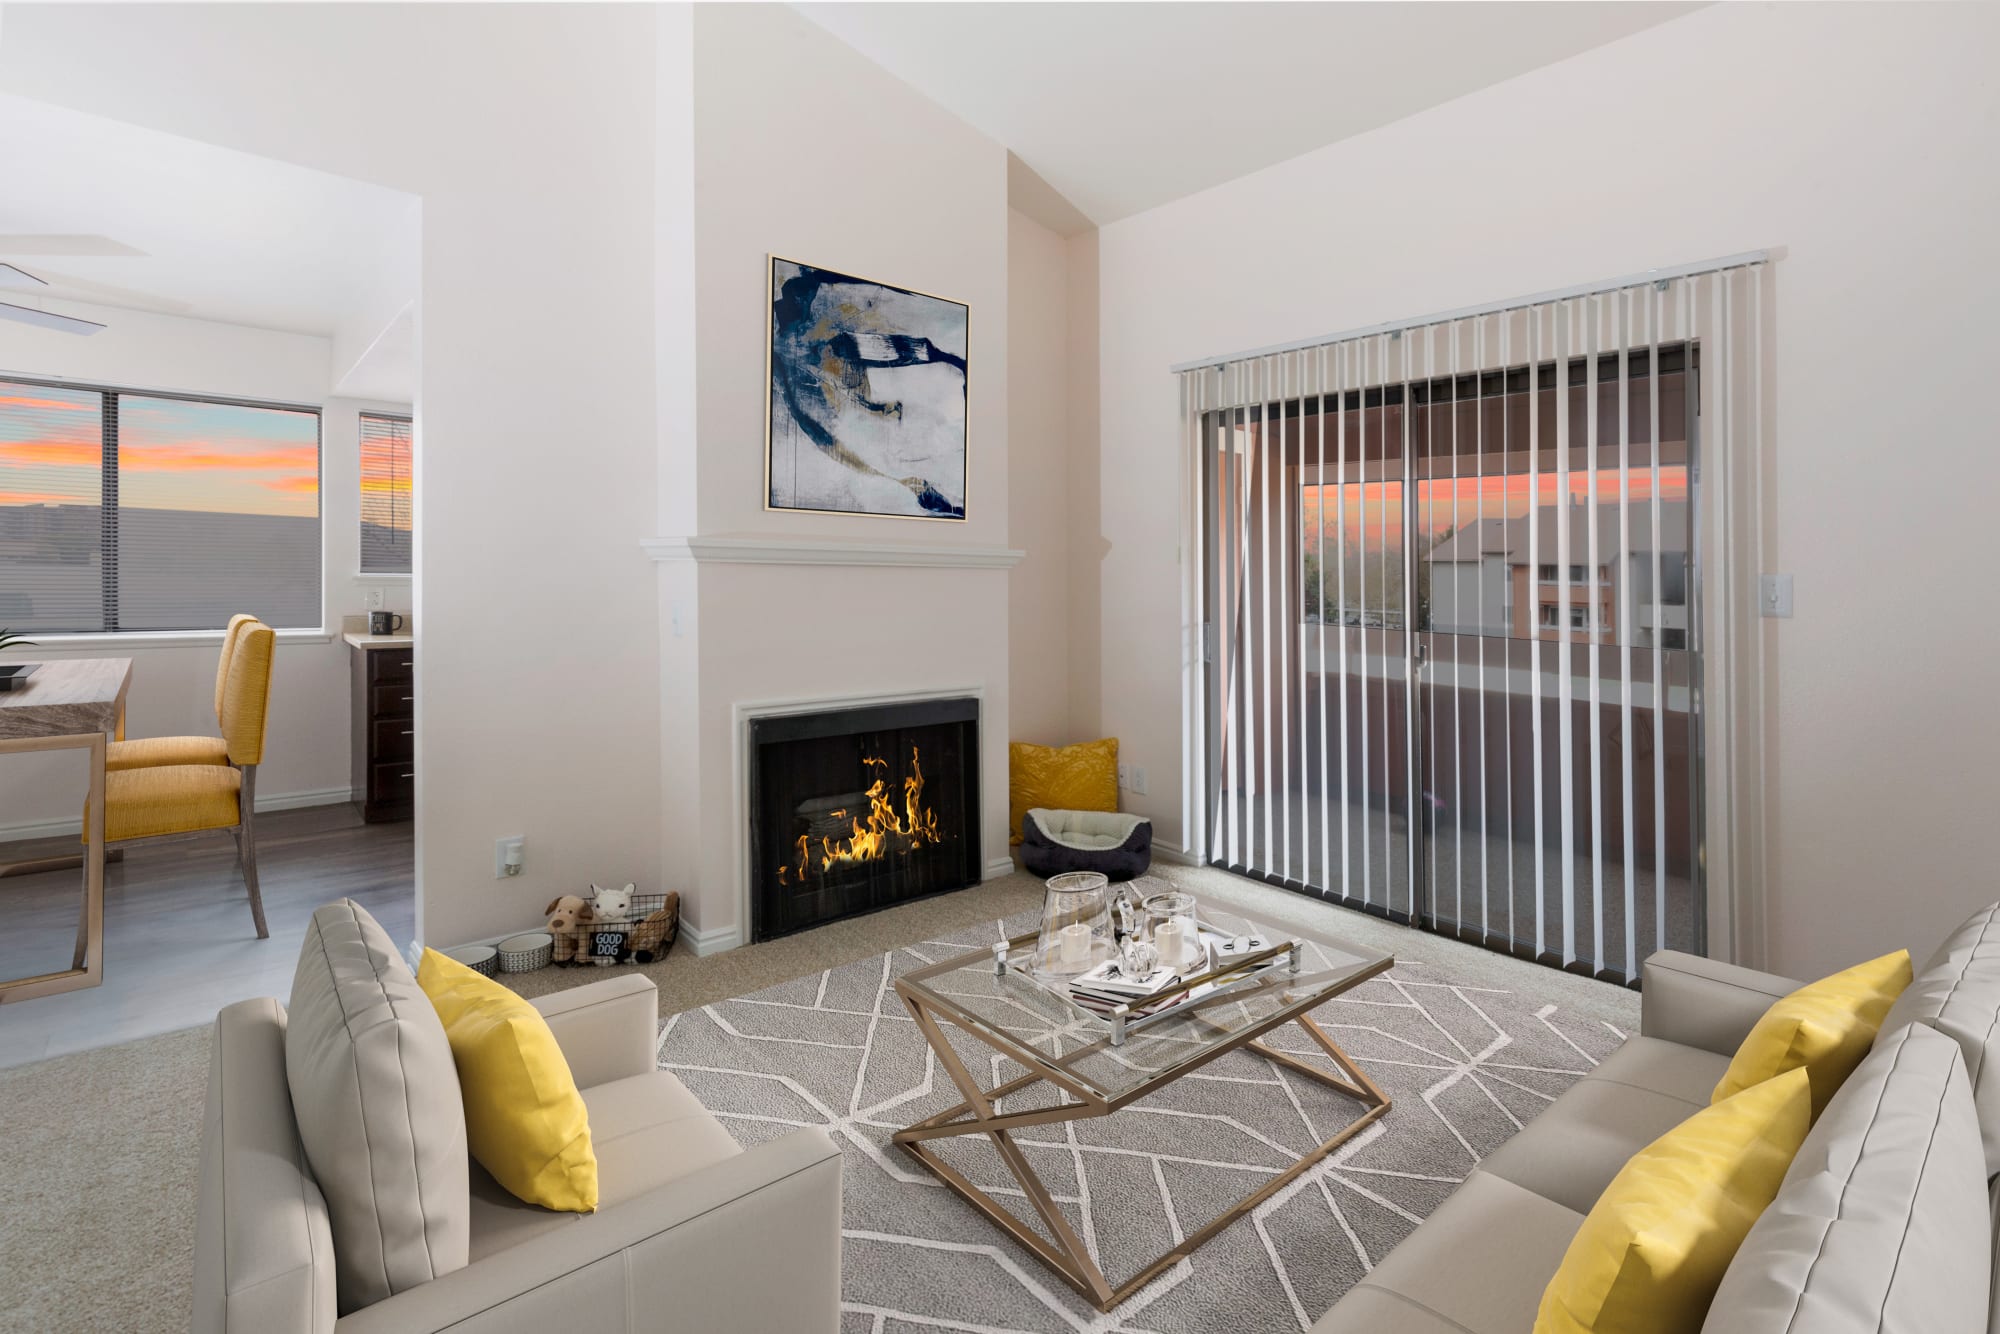 Living room with a fireplace at Shadowbrook Apartments in West Valley City, Utah